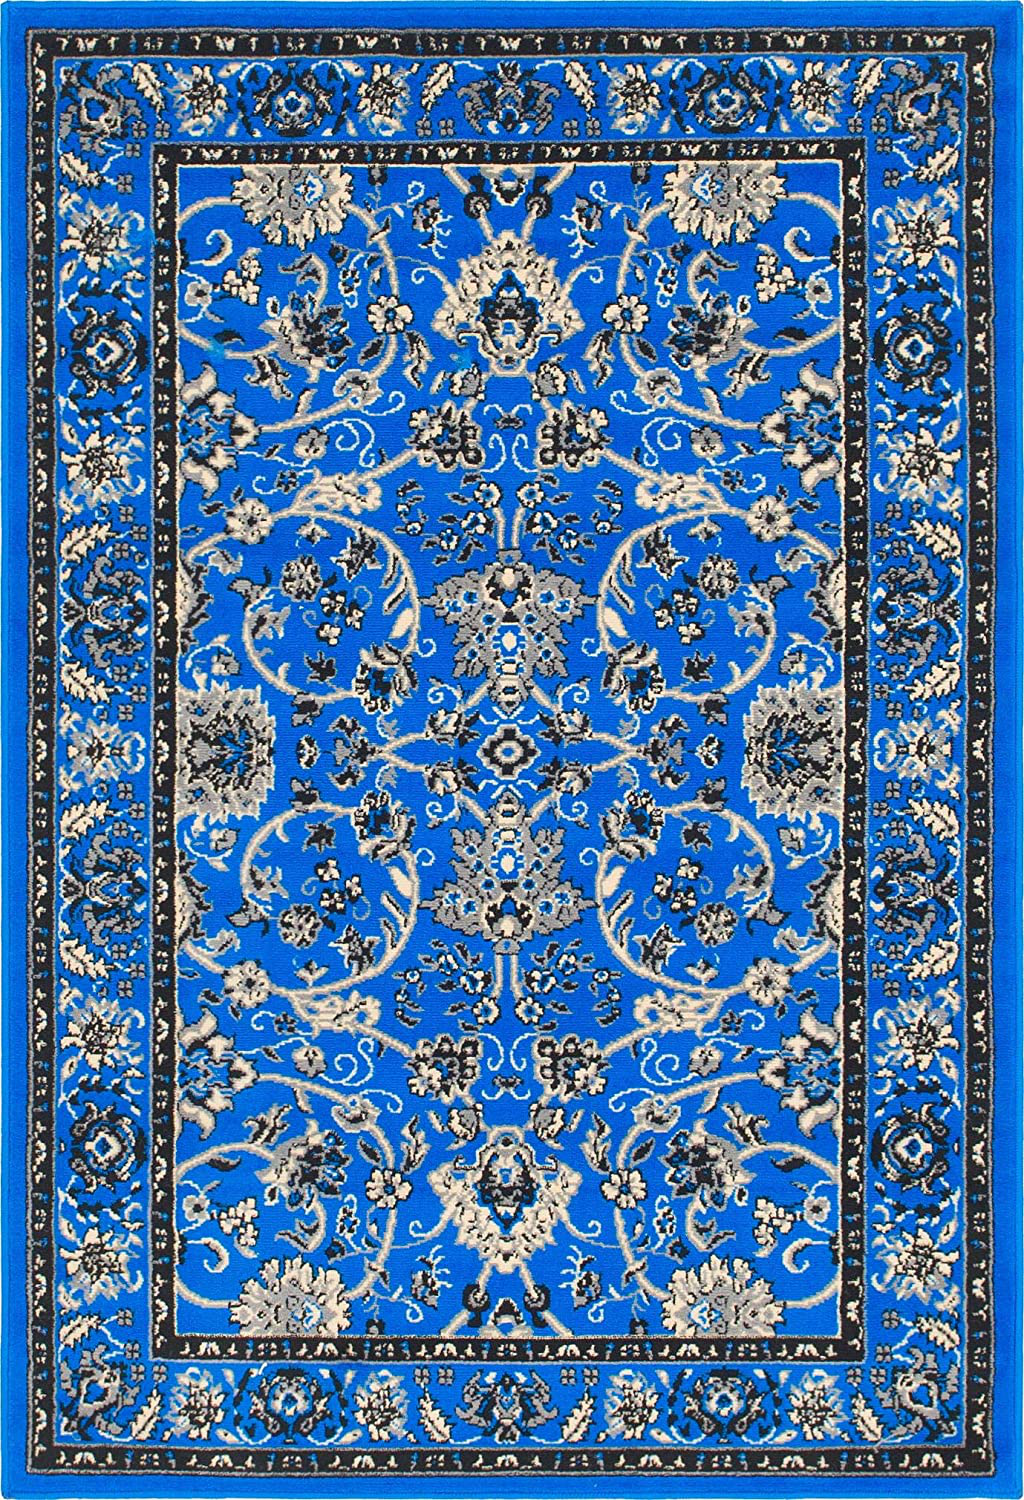 Unique Loom Kashan Traditional Floral Area Rug, 4 x 6 Feet, Blue/Ivory